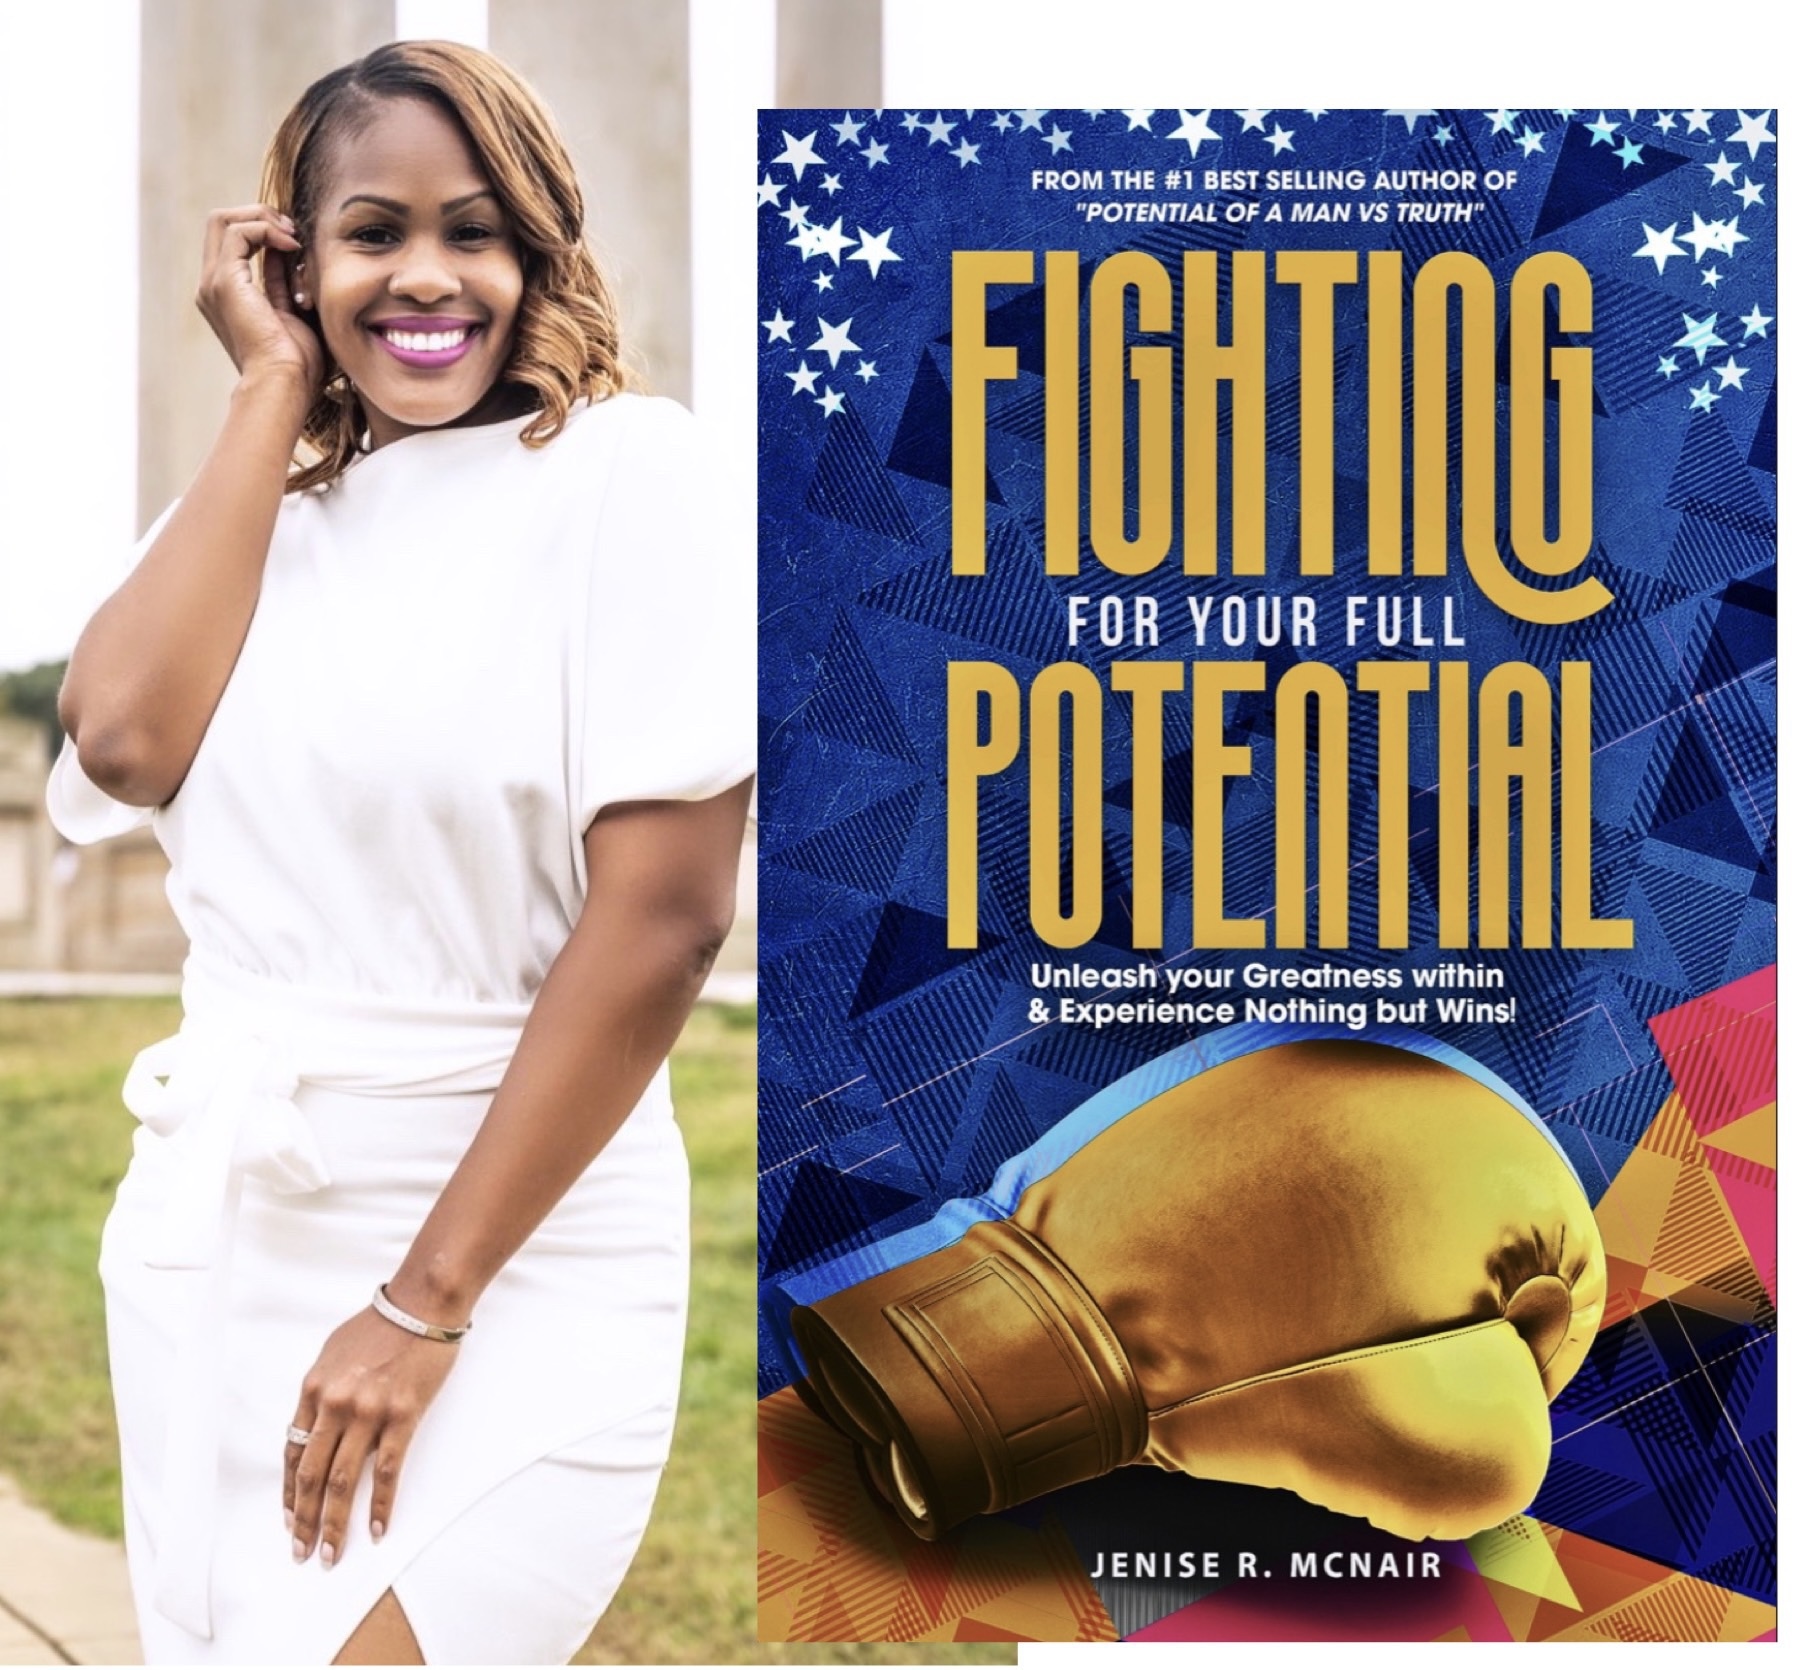 Serial entrepreneur, Jenise McNair, becomes a #1 International Bestselling Author, from her book titled: "Fighting For Your Full Potential"